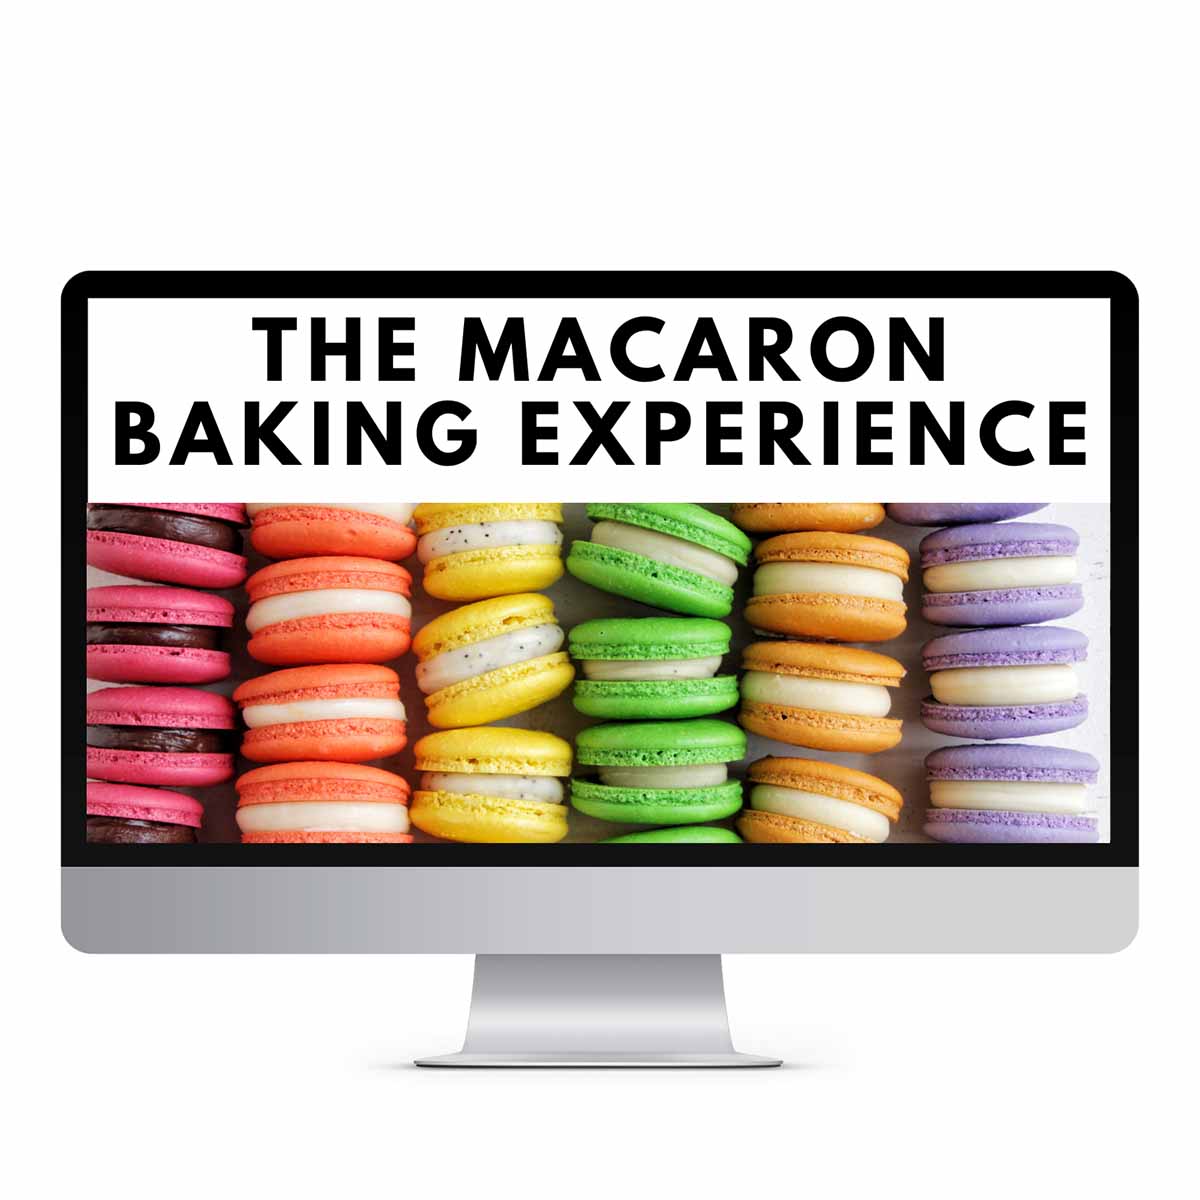 The Macaron Baking Experience course promotional image.